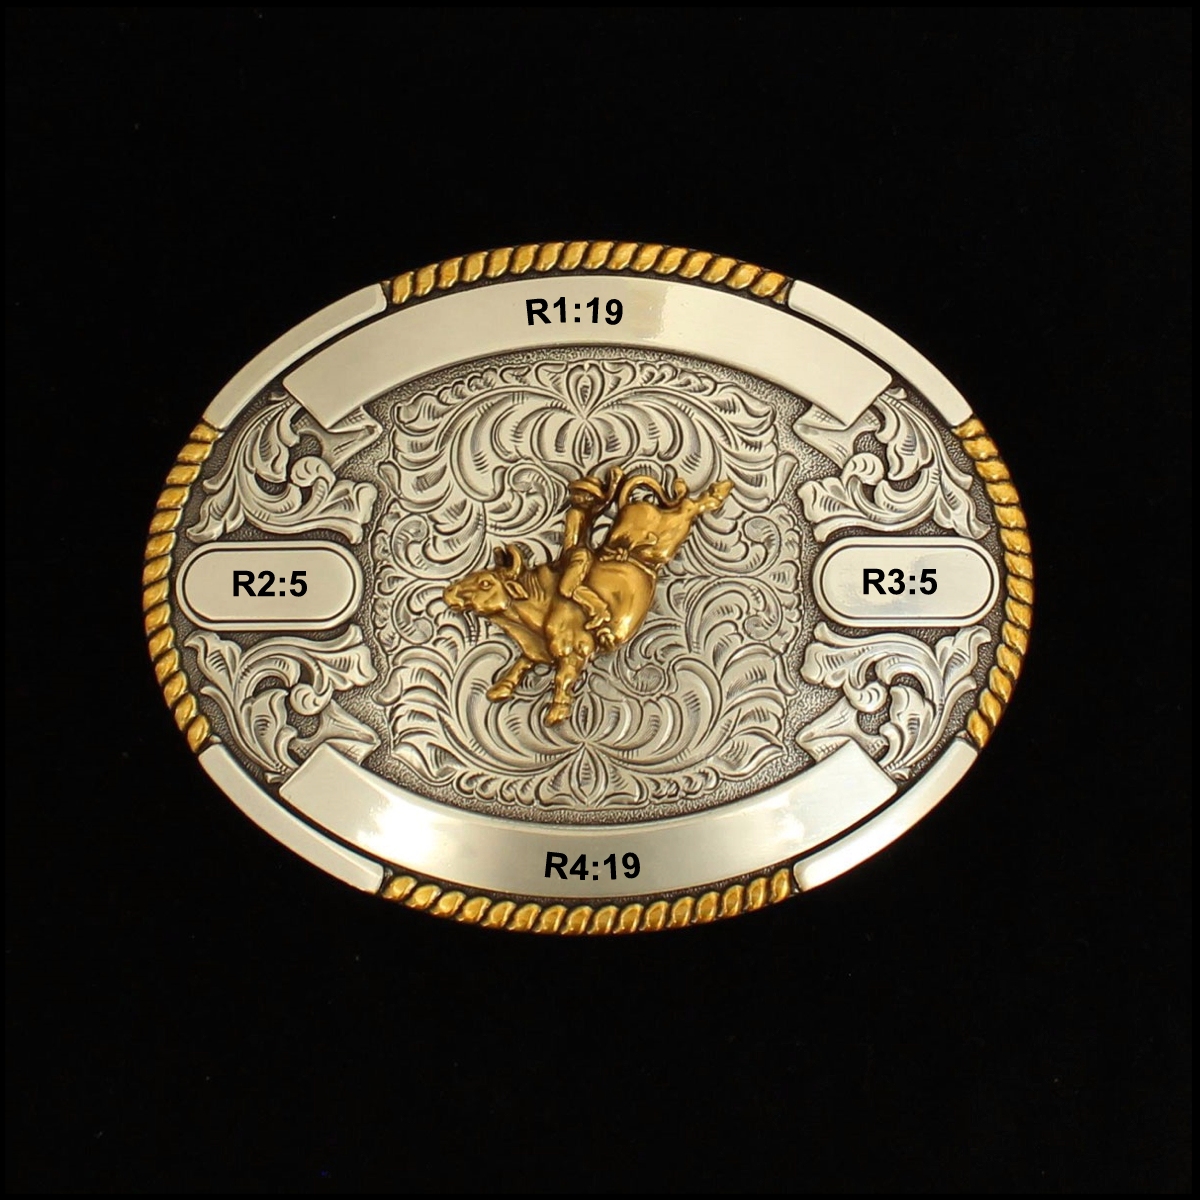 MF-38624 Trophy Buckle Oval Bull Rider 4 Ribbons 3-1/2x4-1/2